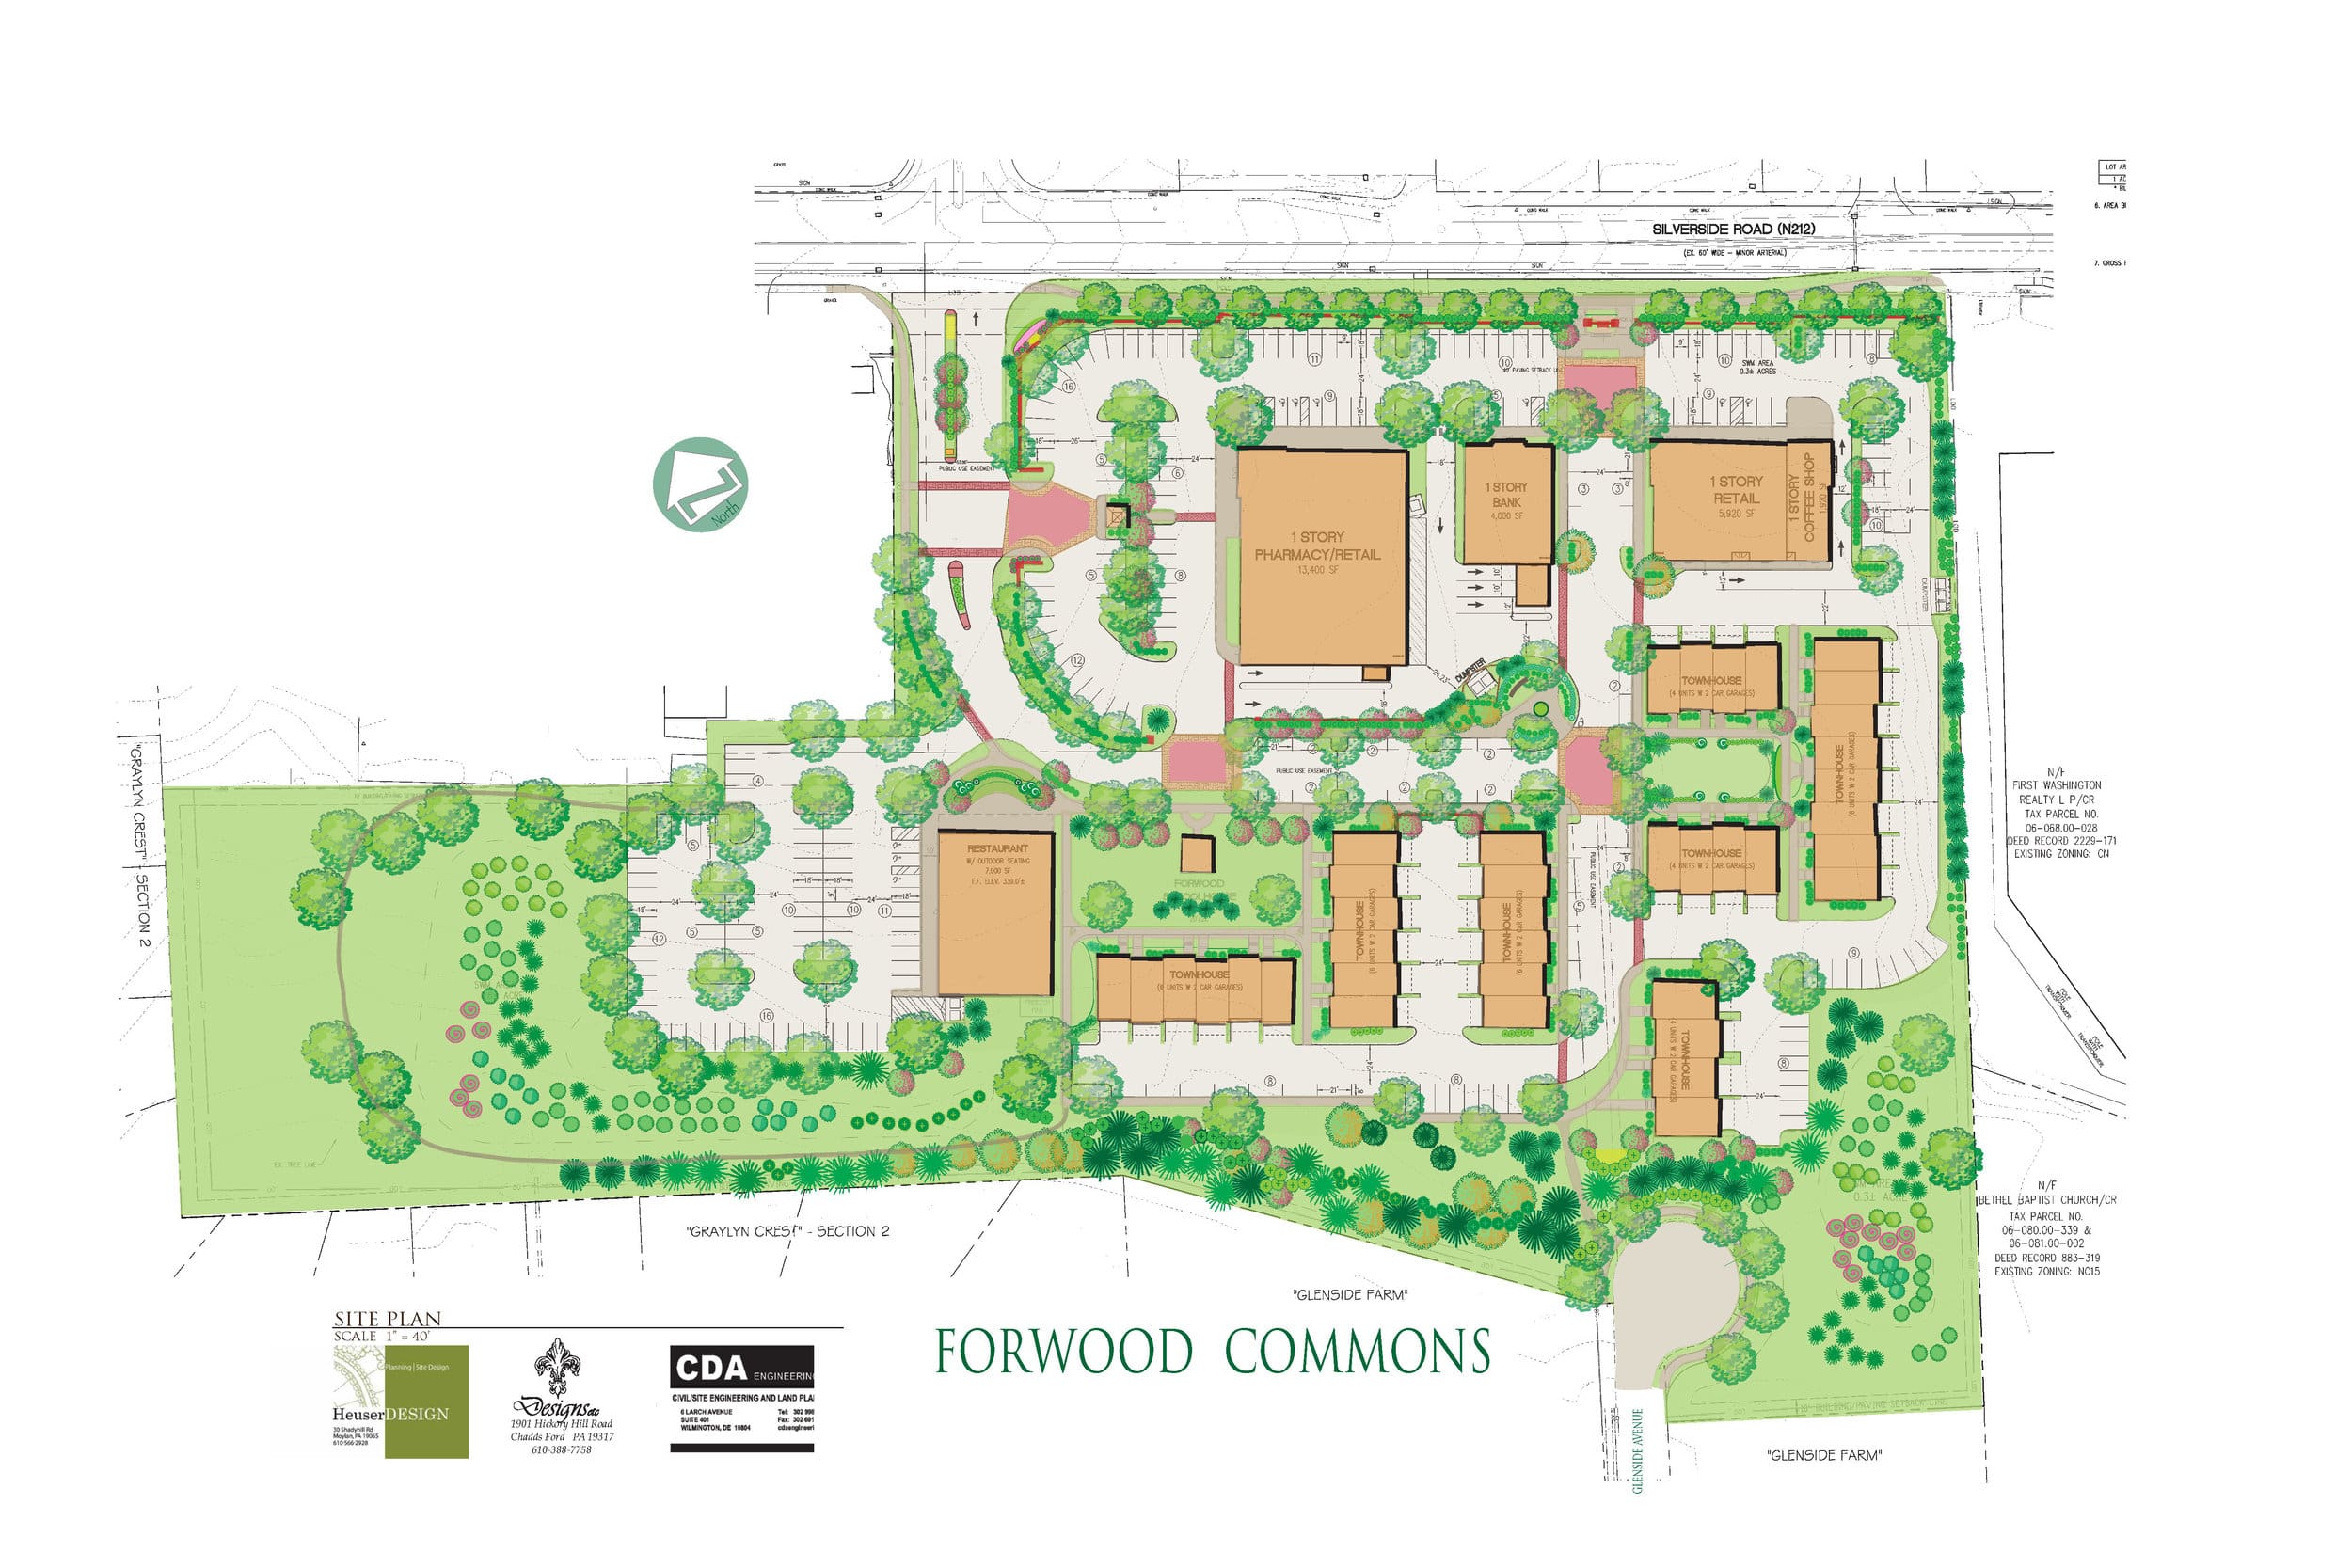 Forwood Commons, according to plans prepared by CDA Engineering, will include 38 townhomes, all with two-car garages, and four buildings for retail. (CDA Engineering)